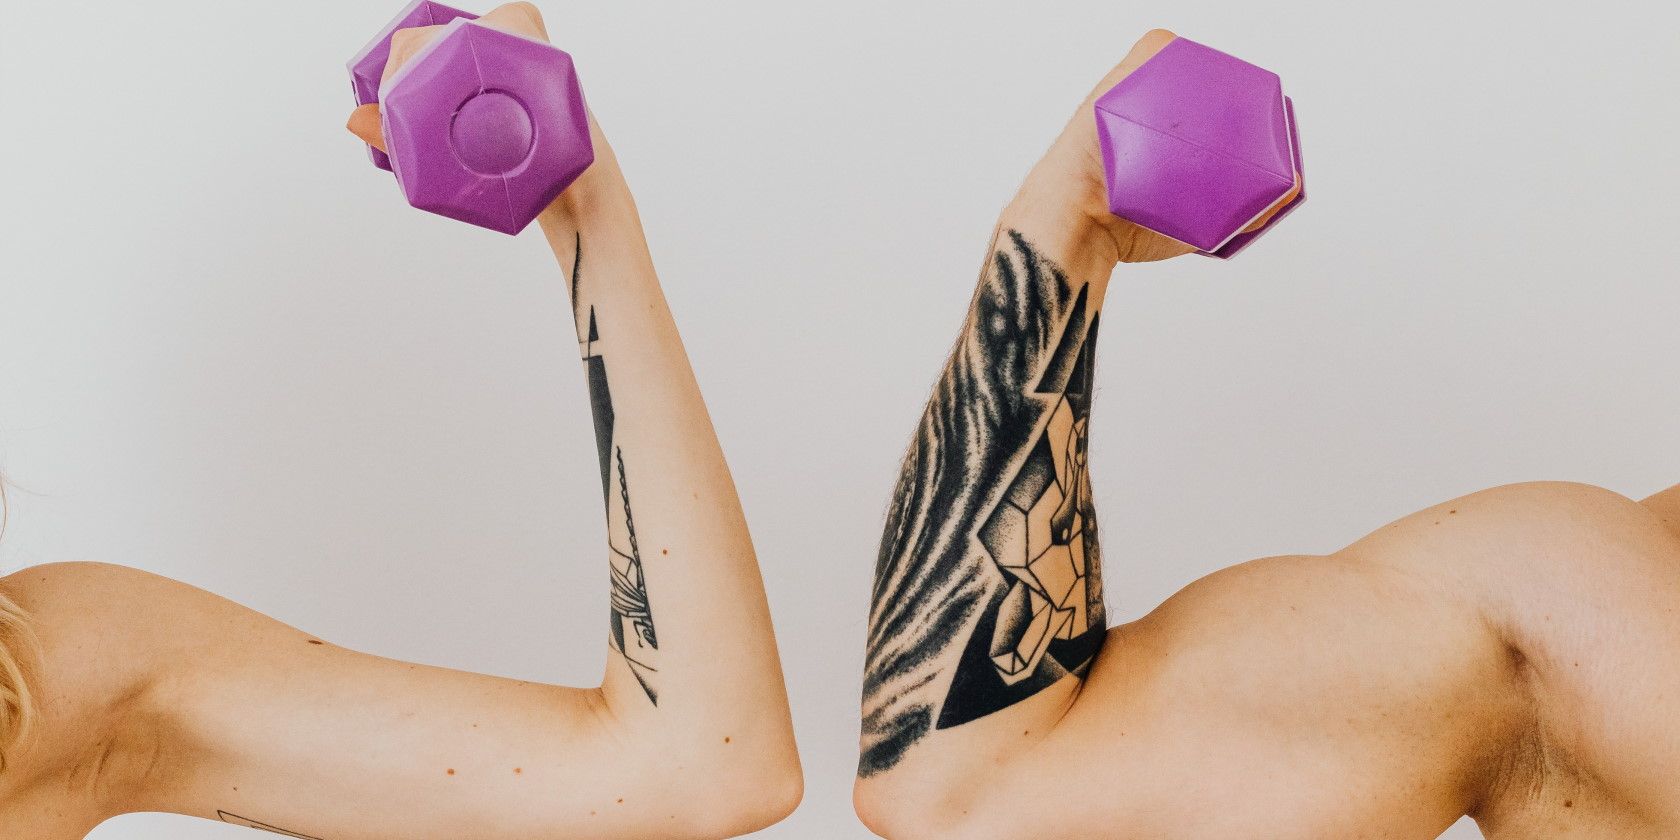 tattooed couple flexing arm muscles and holding purple dumbbells